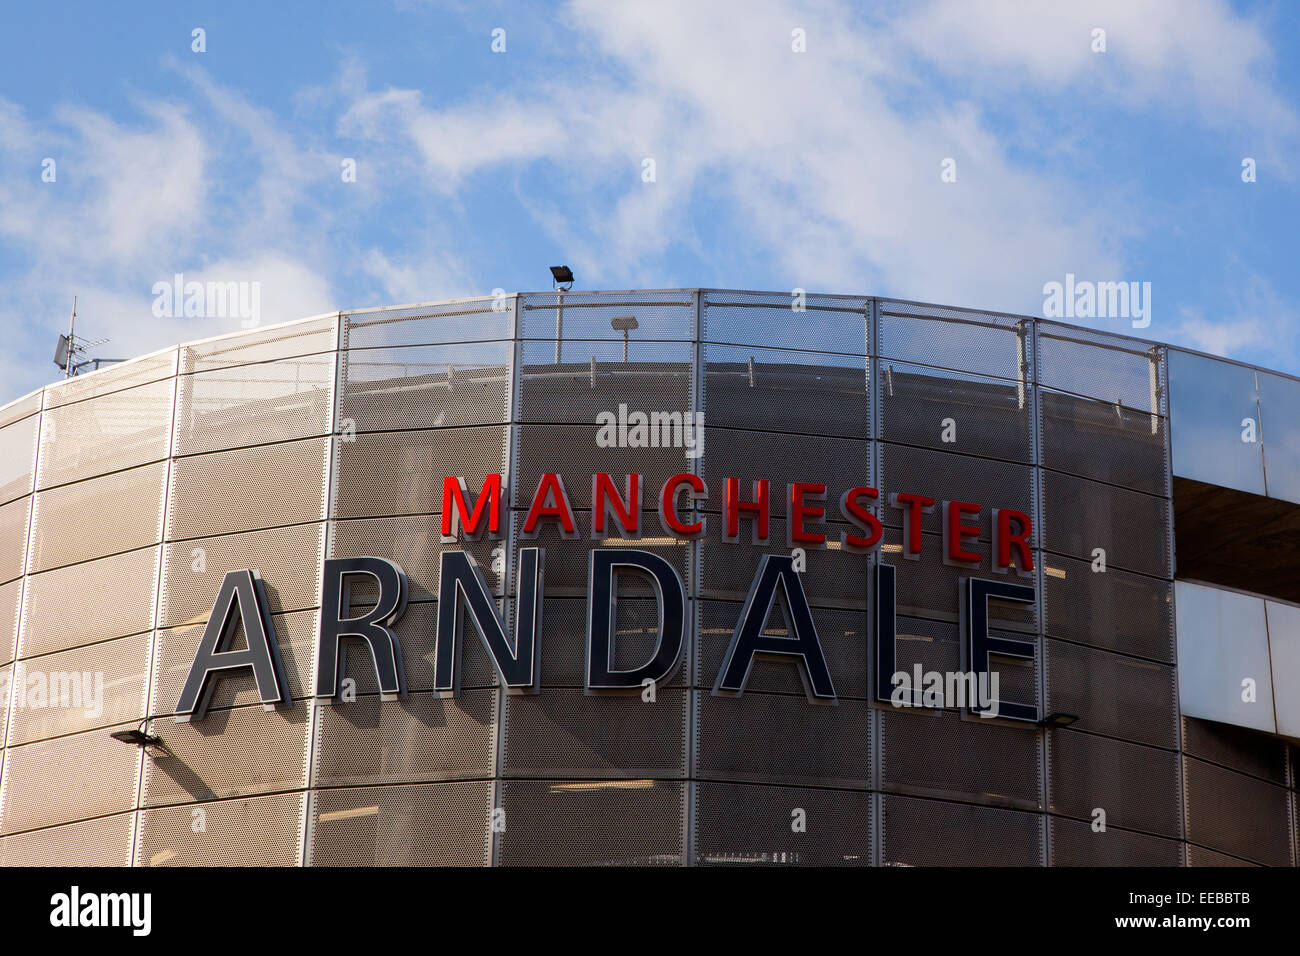 England, Manchester, Arndale Shopping Centre sign Stock Photo